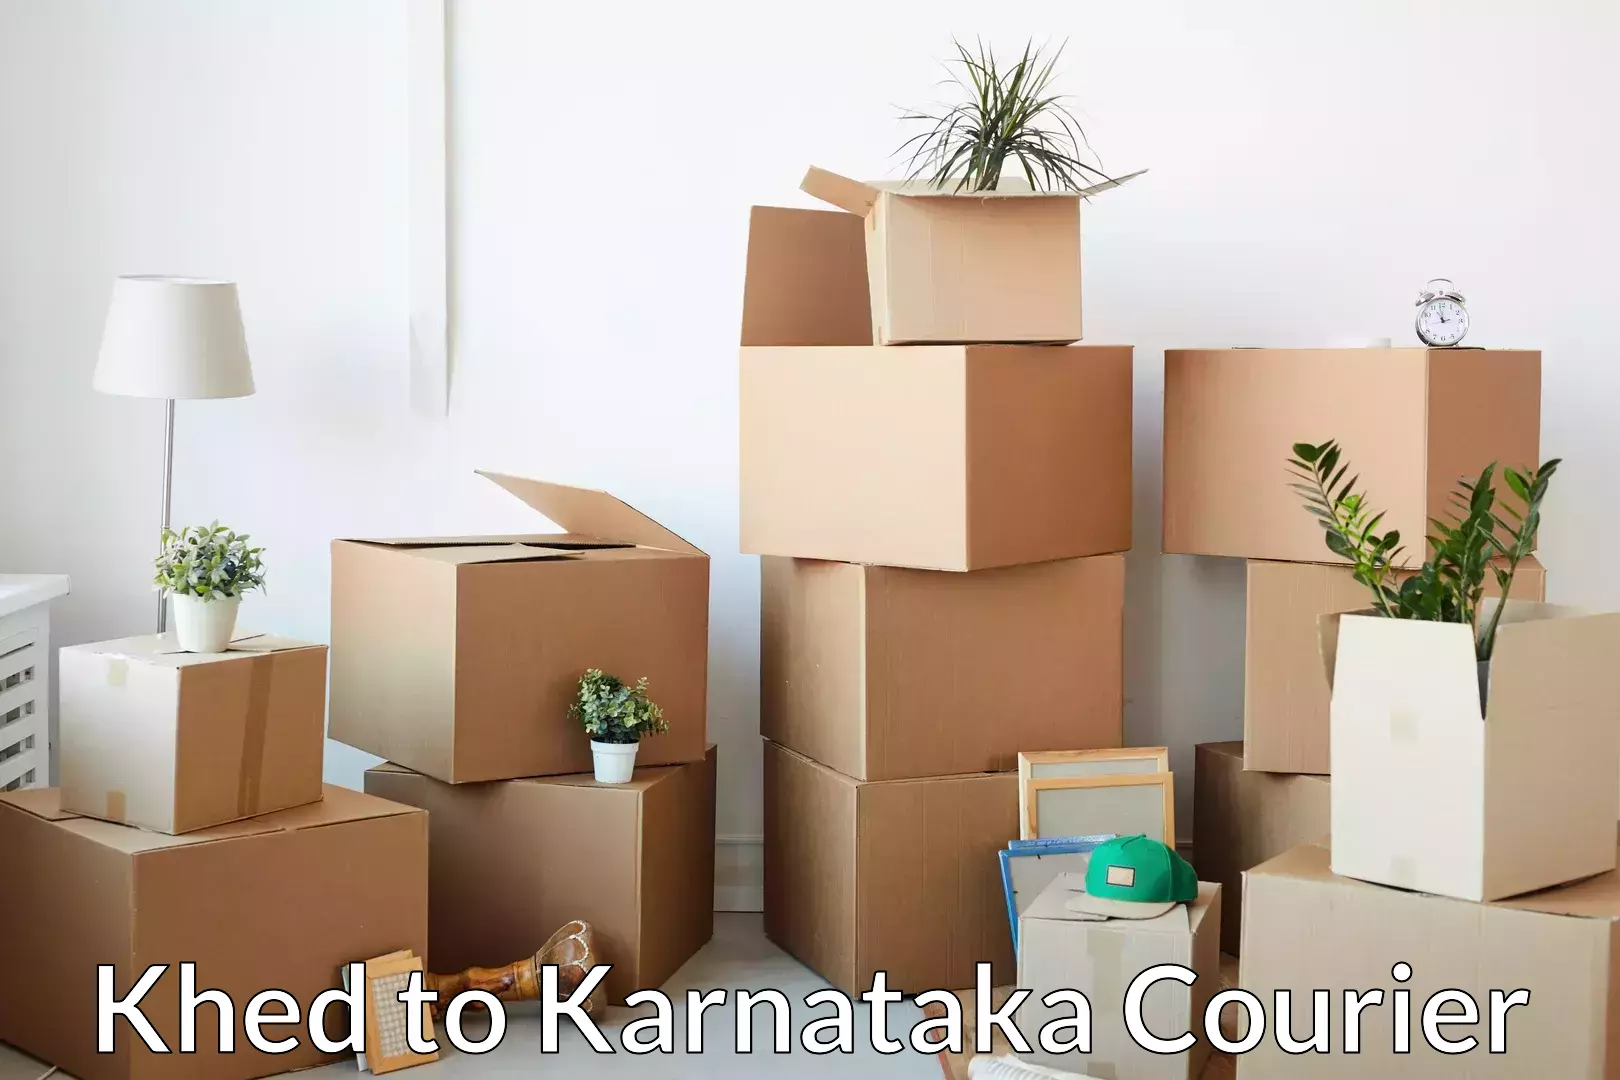 Efficient moving company in Khed to Karnataka